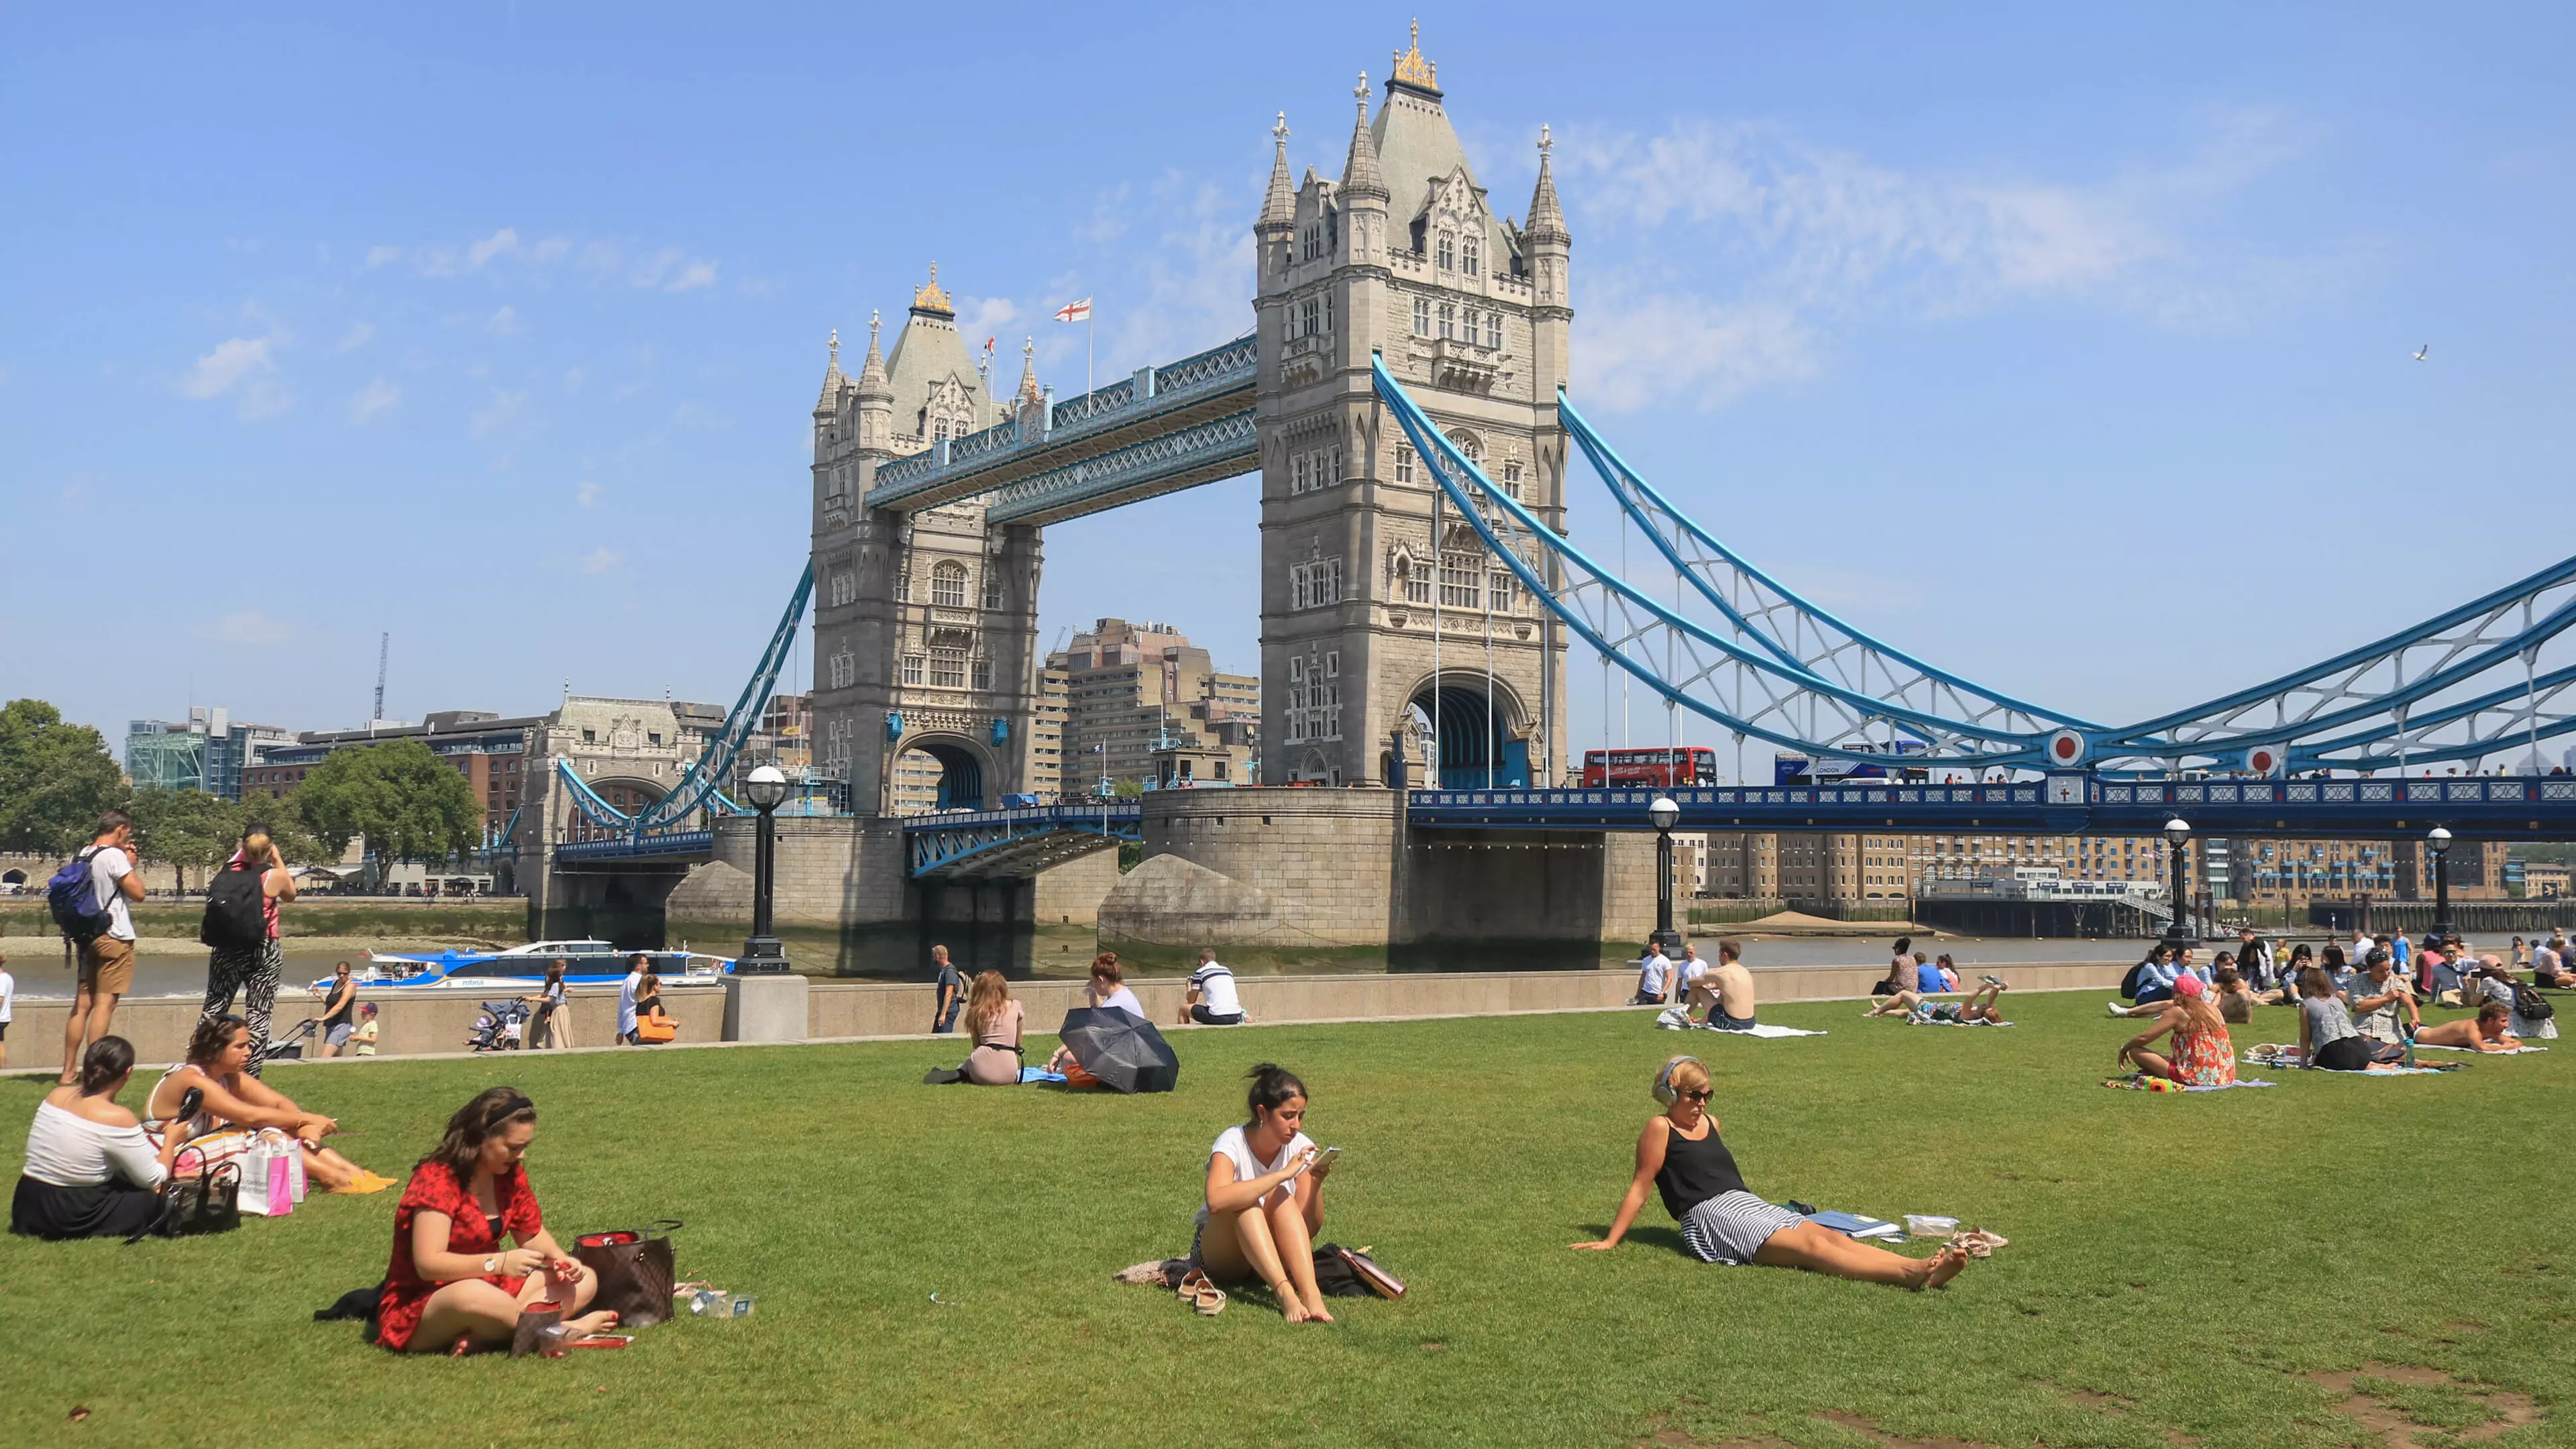 This Weekend's Bank Holiday Could Be The Start Of Summer At Last With Temperatures Of Up To 25°C